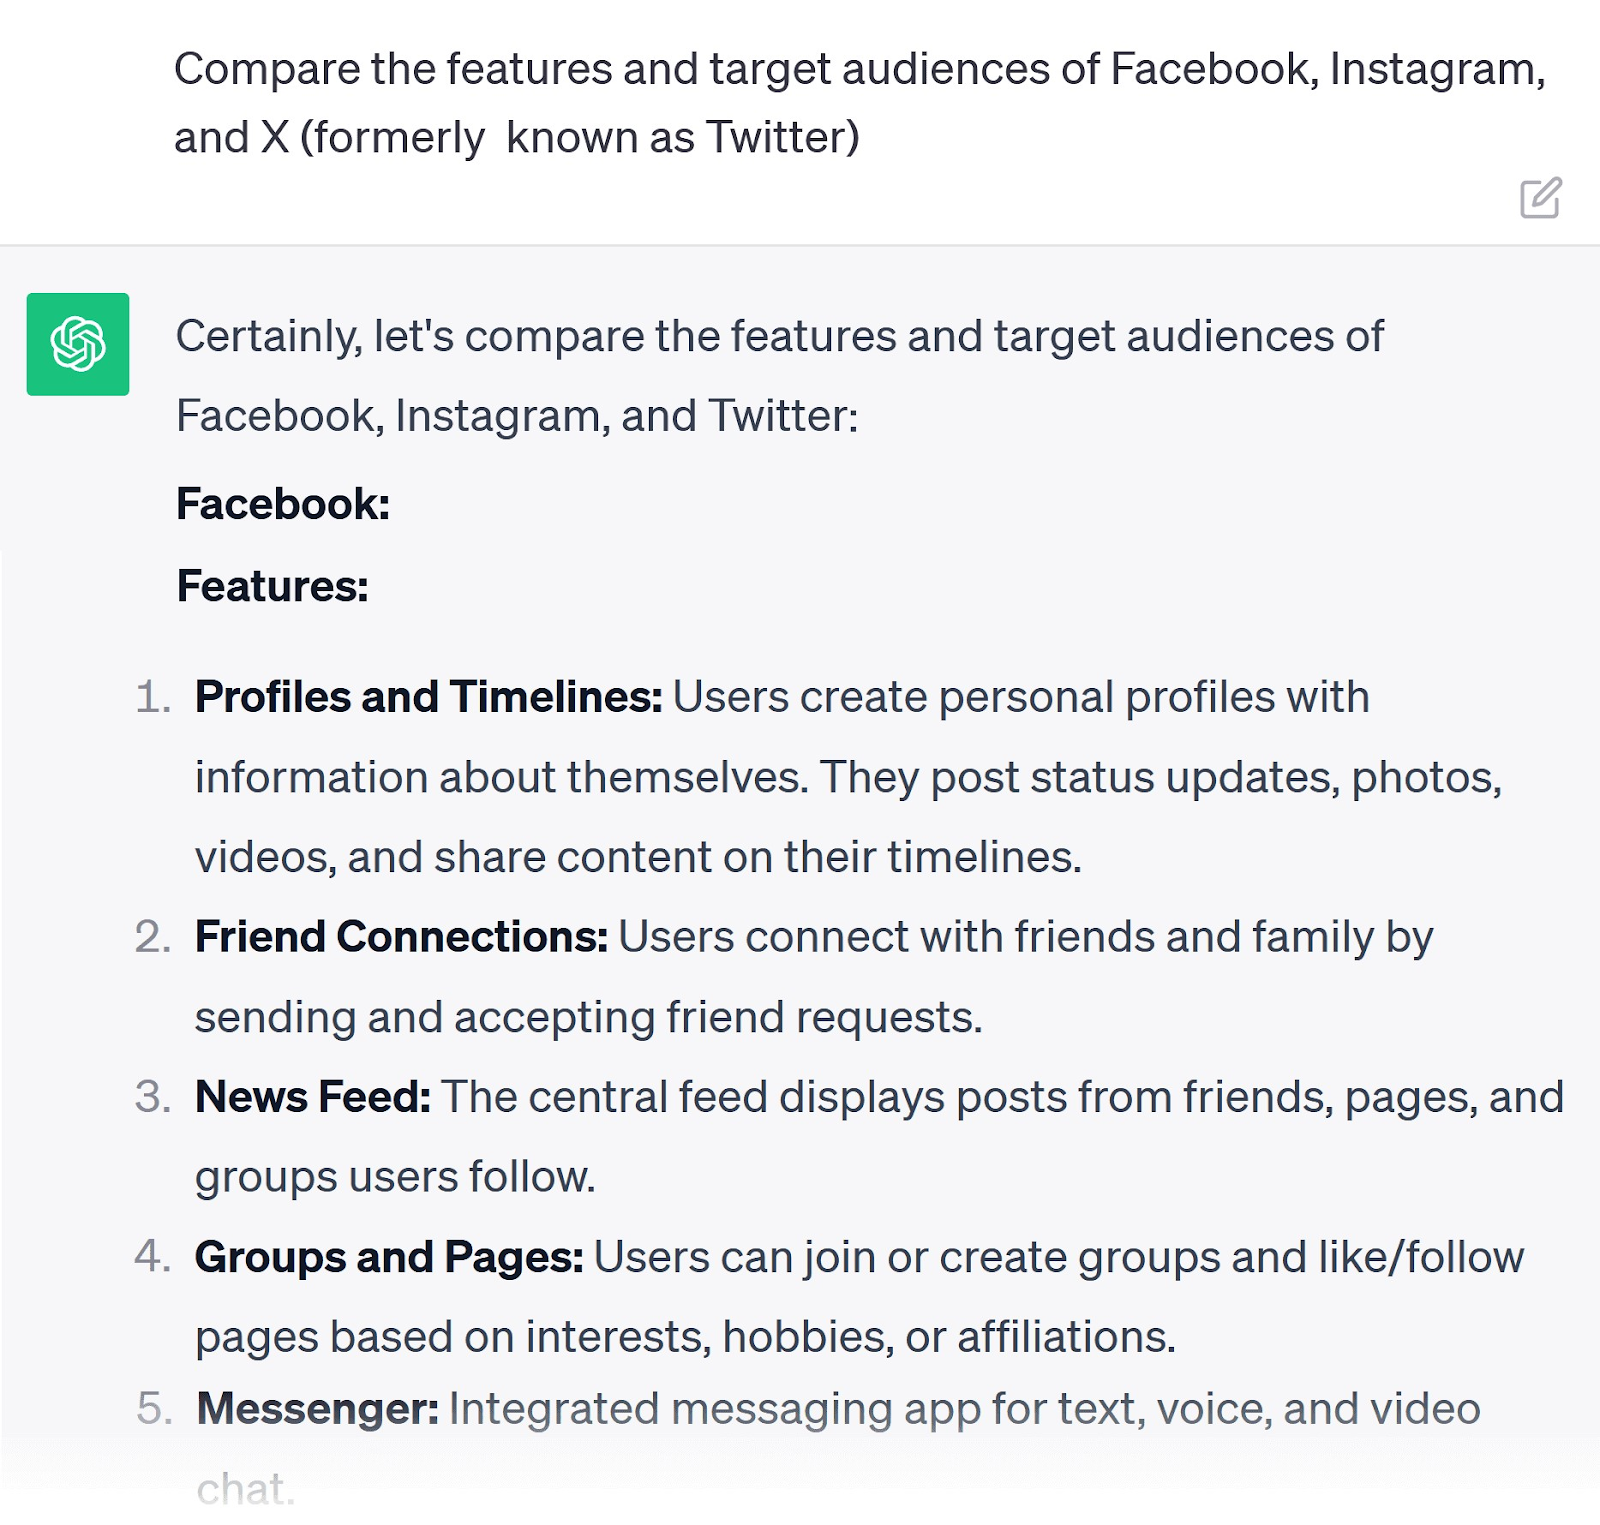 A prompt asking ChatGPT to compare features and target audiences of Facebook, Instagram and X